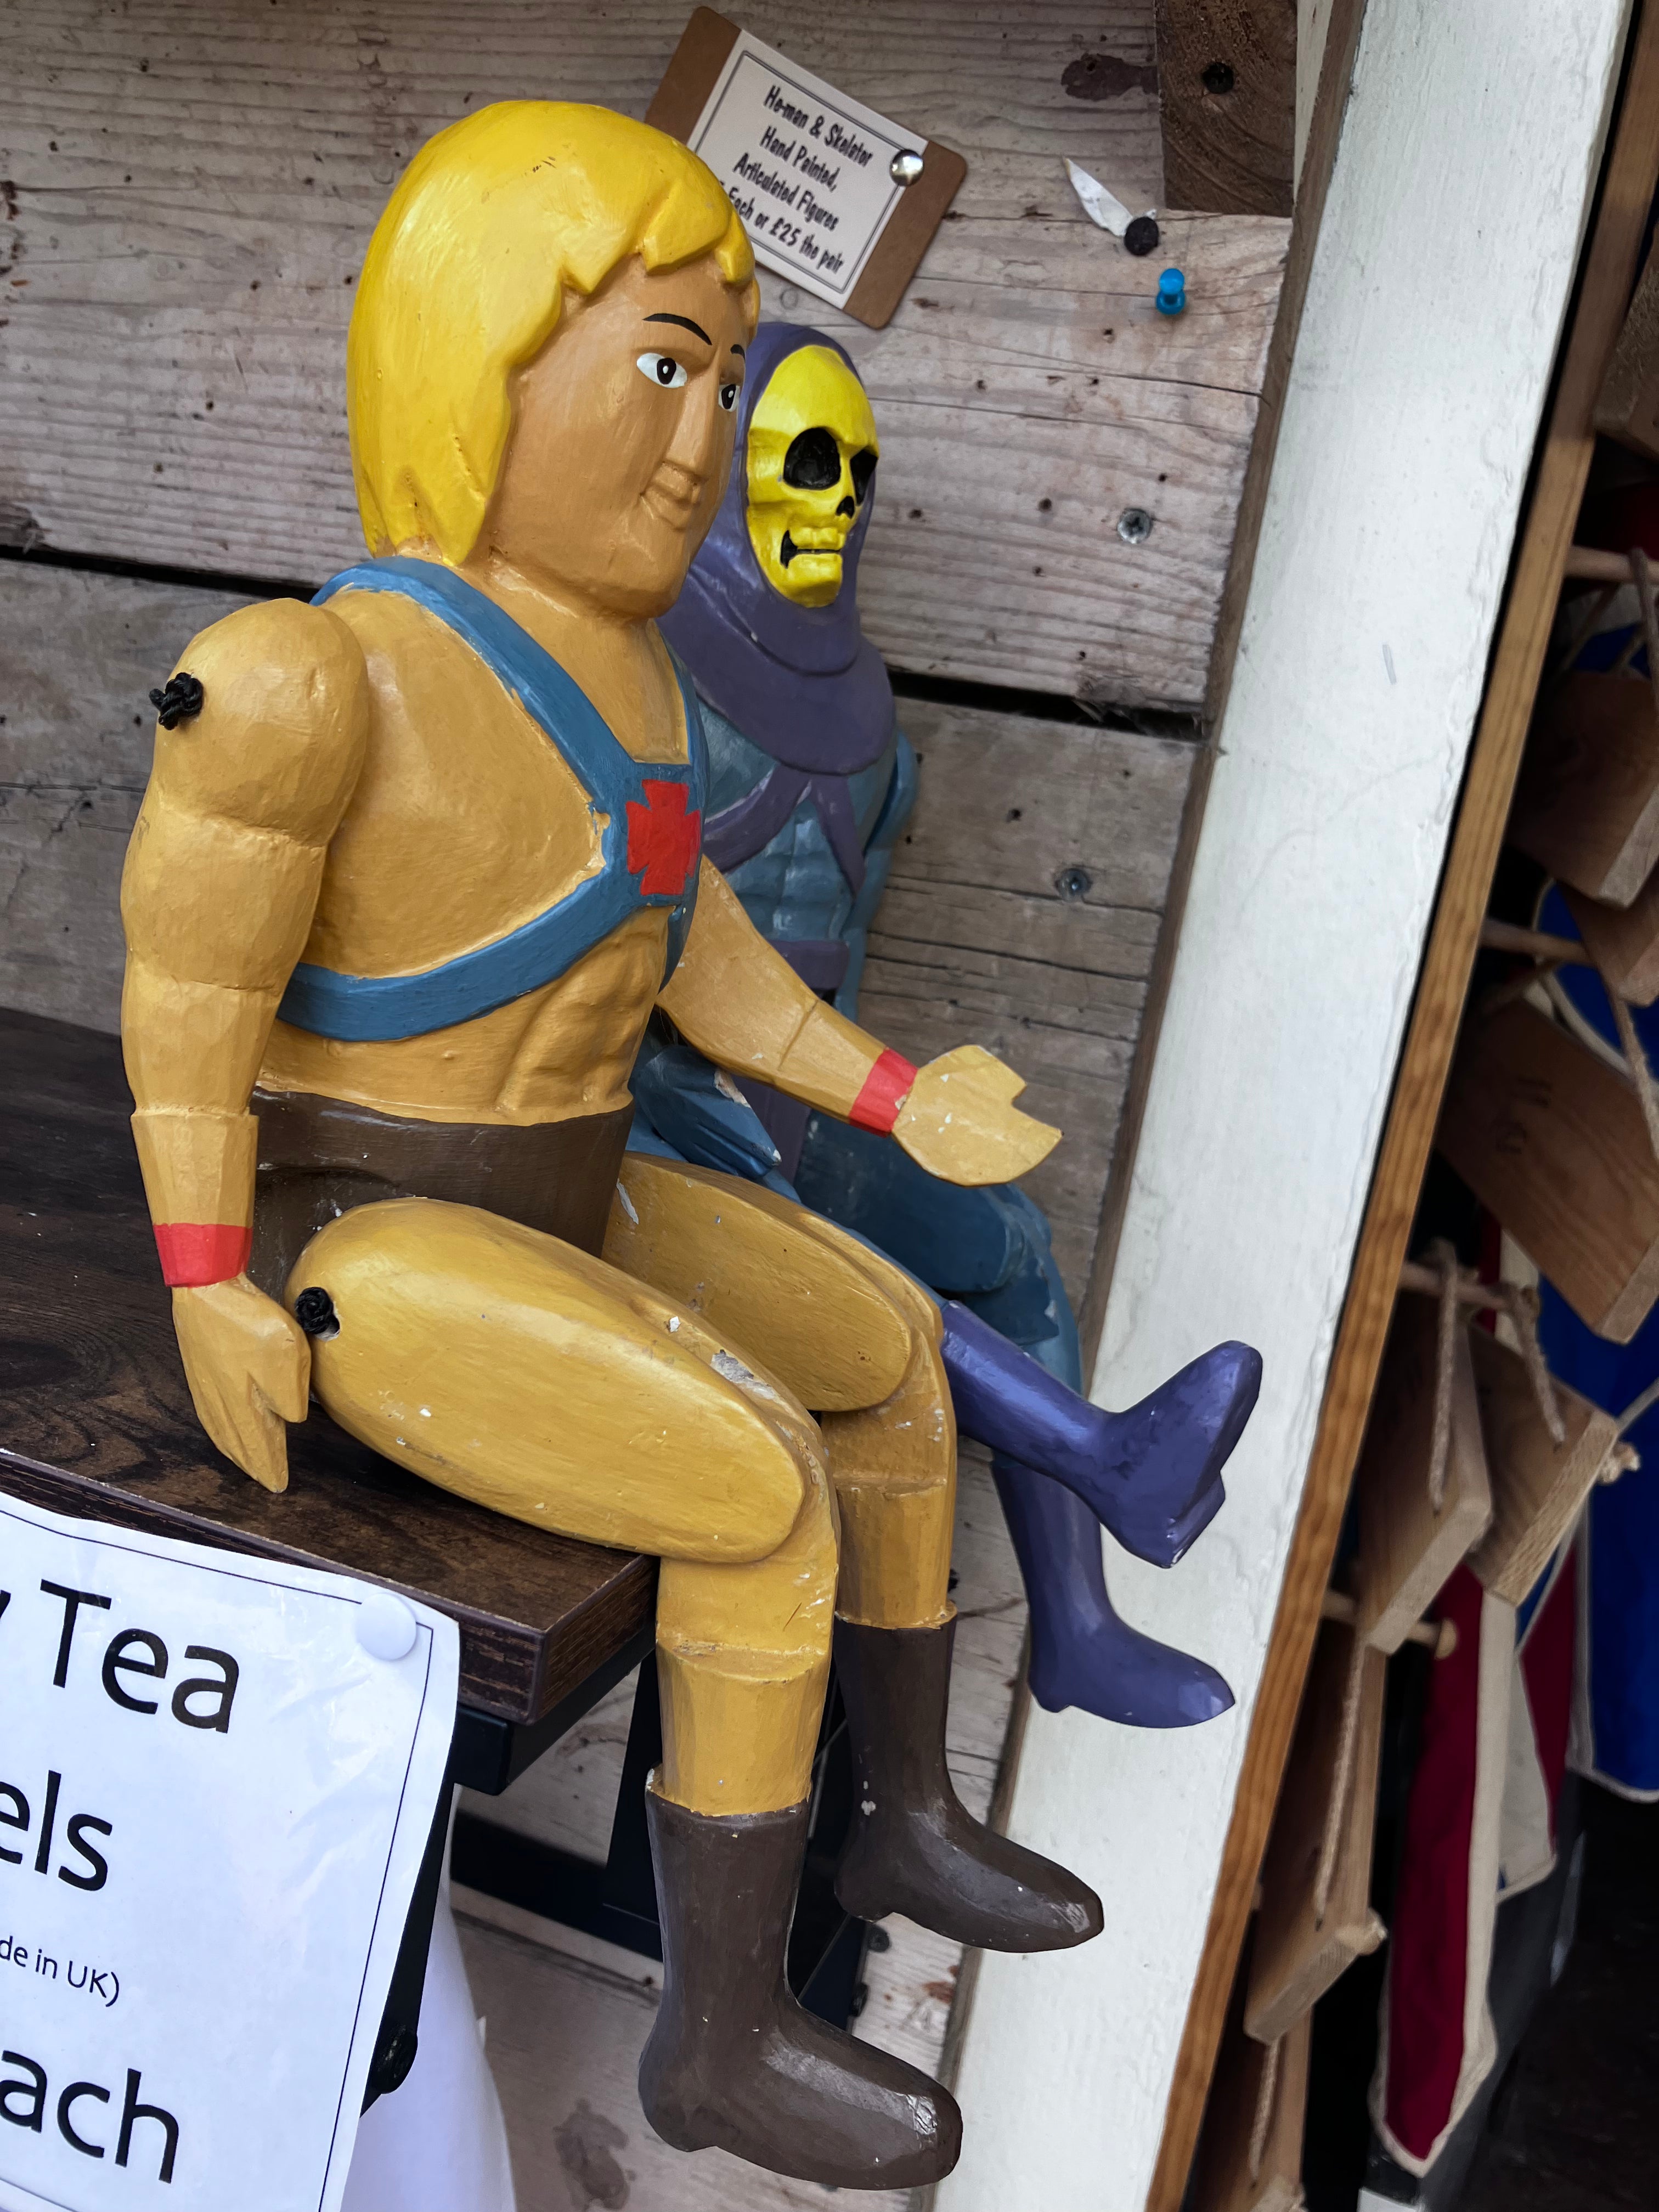 He-man and Skeletor Hand Painted Wooden Articulated Hand Made figure